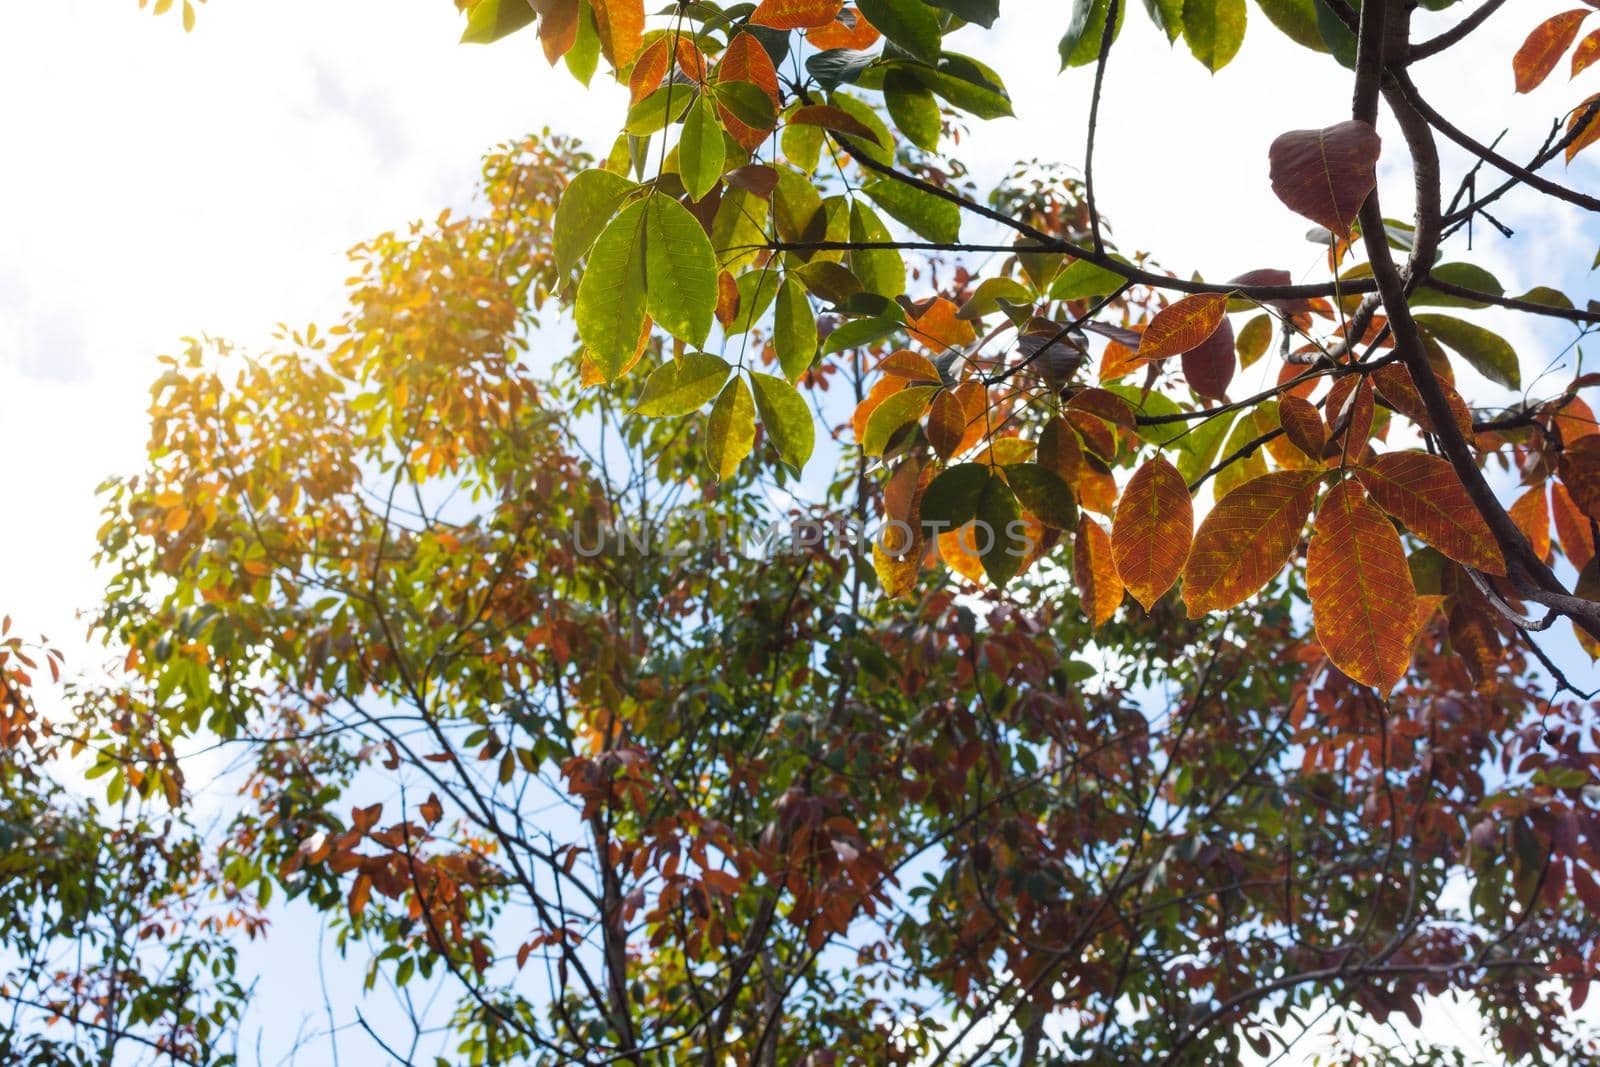 The leaves of the rubber trees are changing color.